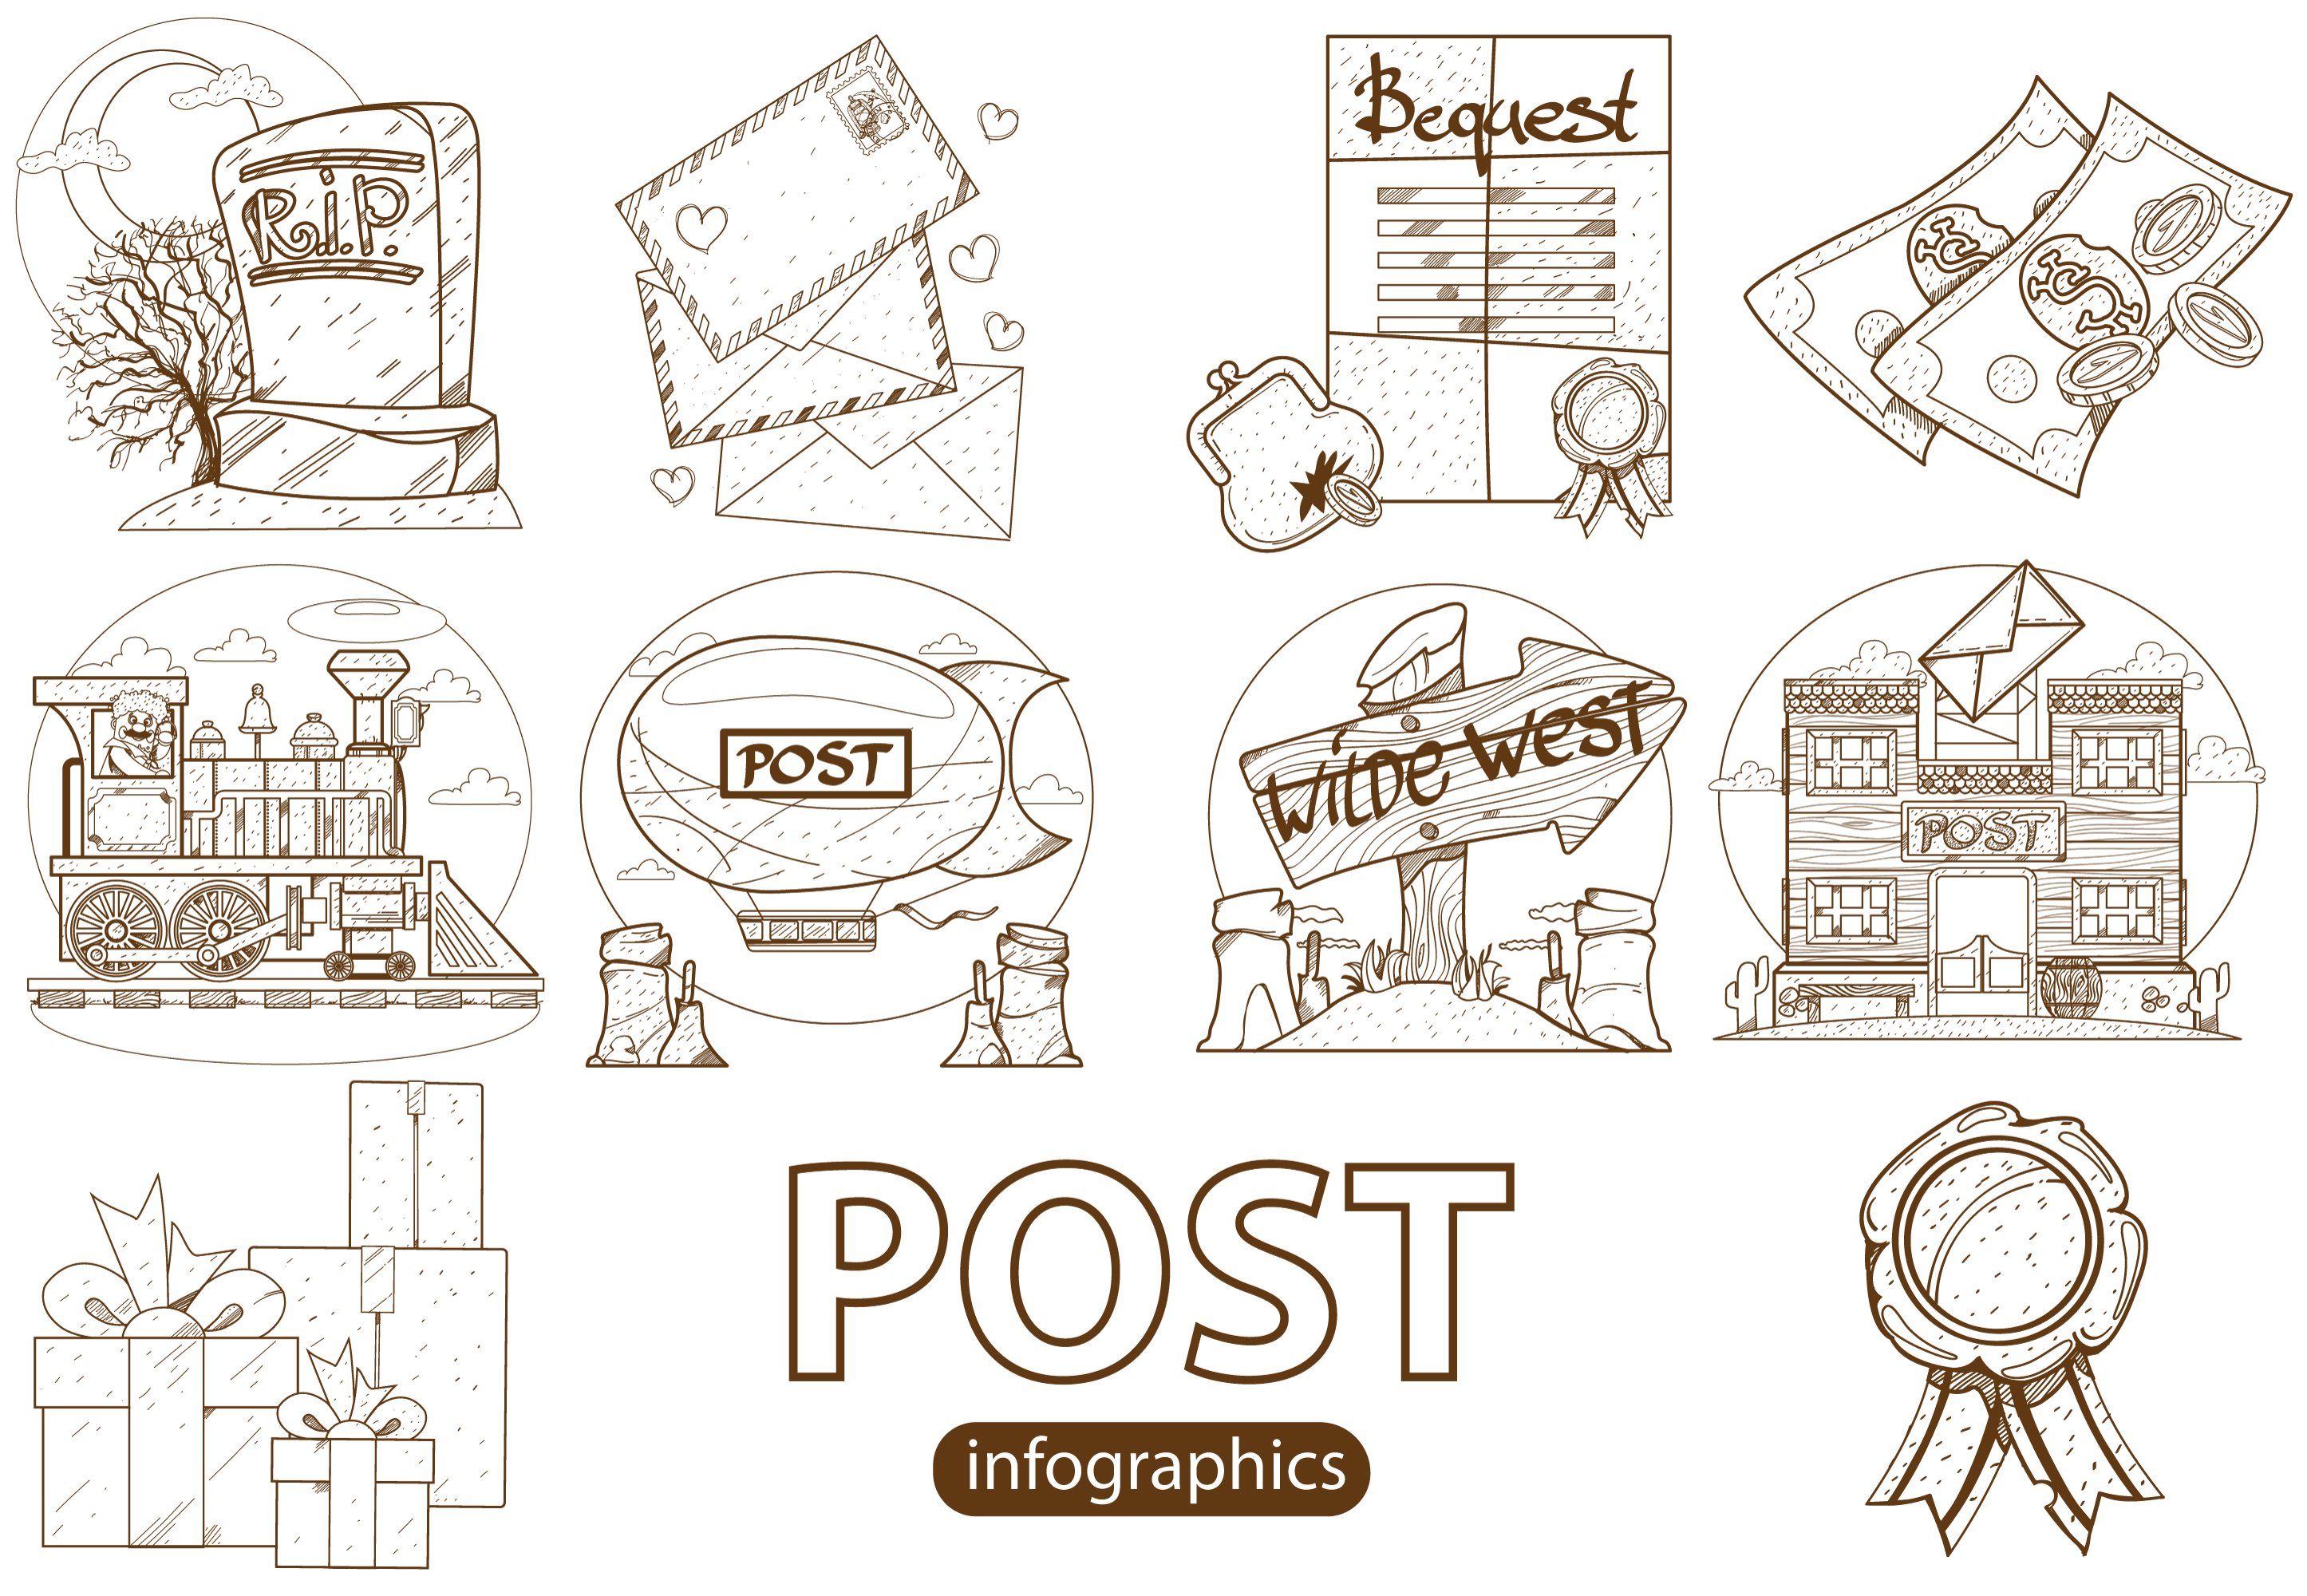 Post office. Infographics set preview image.